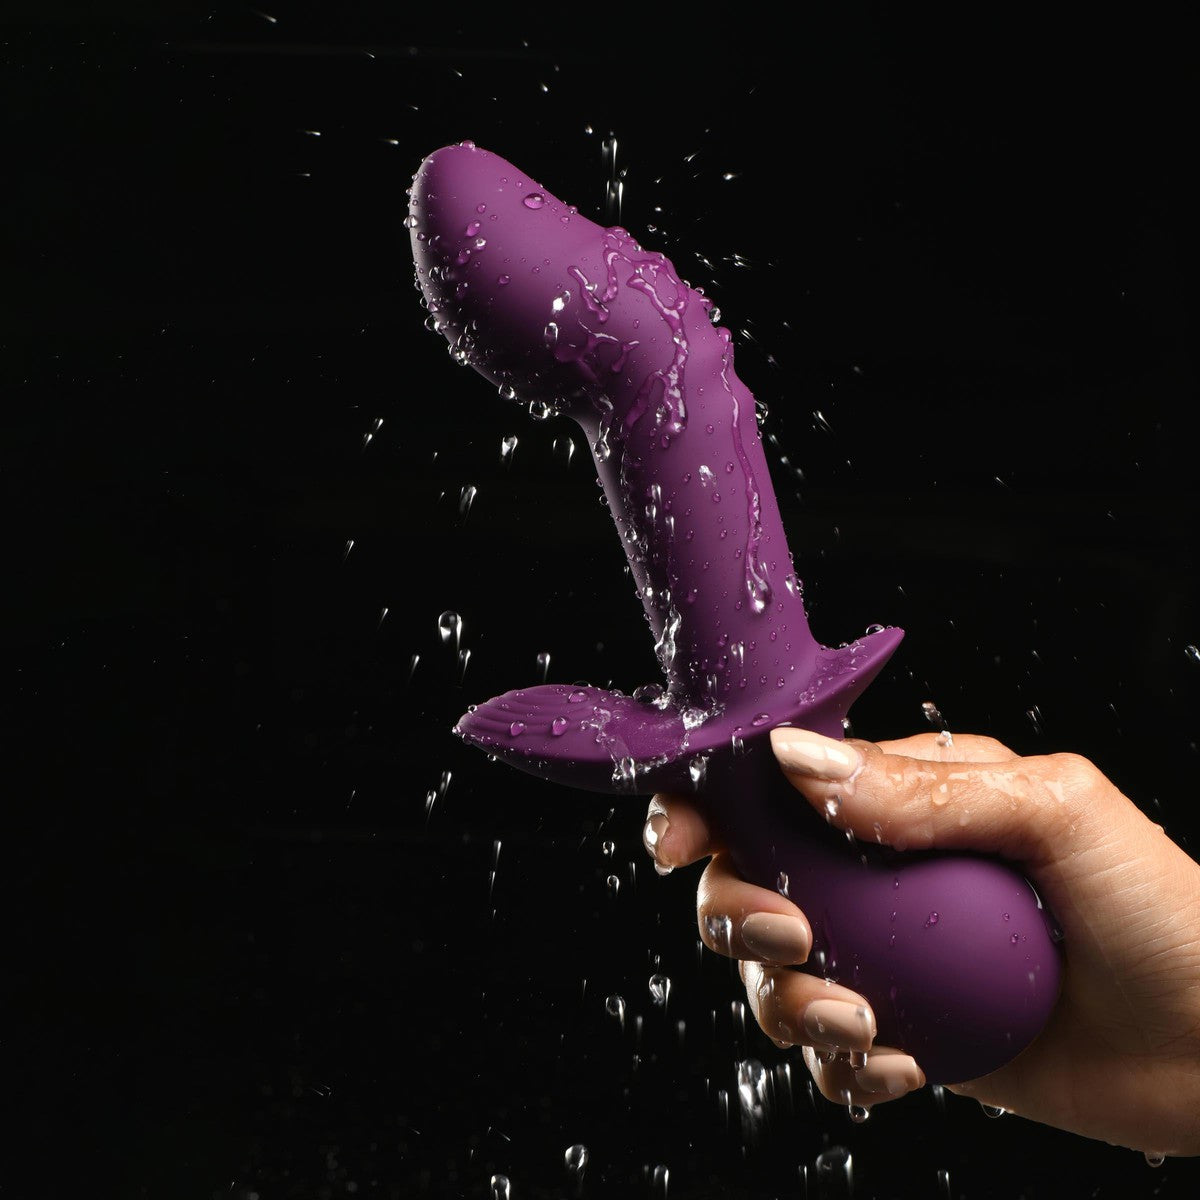 Rumbles 10x G-spot Curved Rumbly Silicone Vibrator